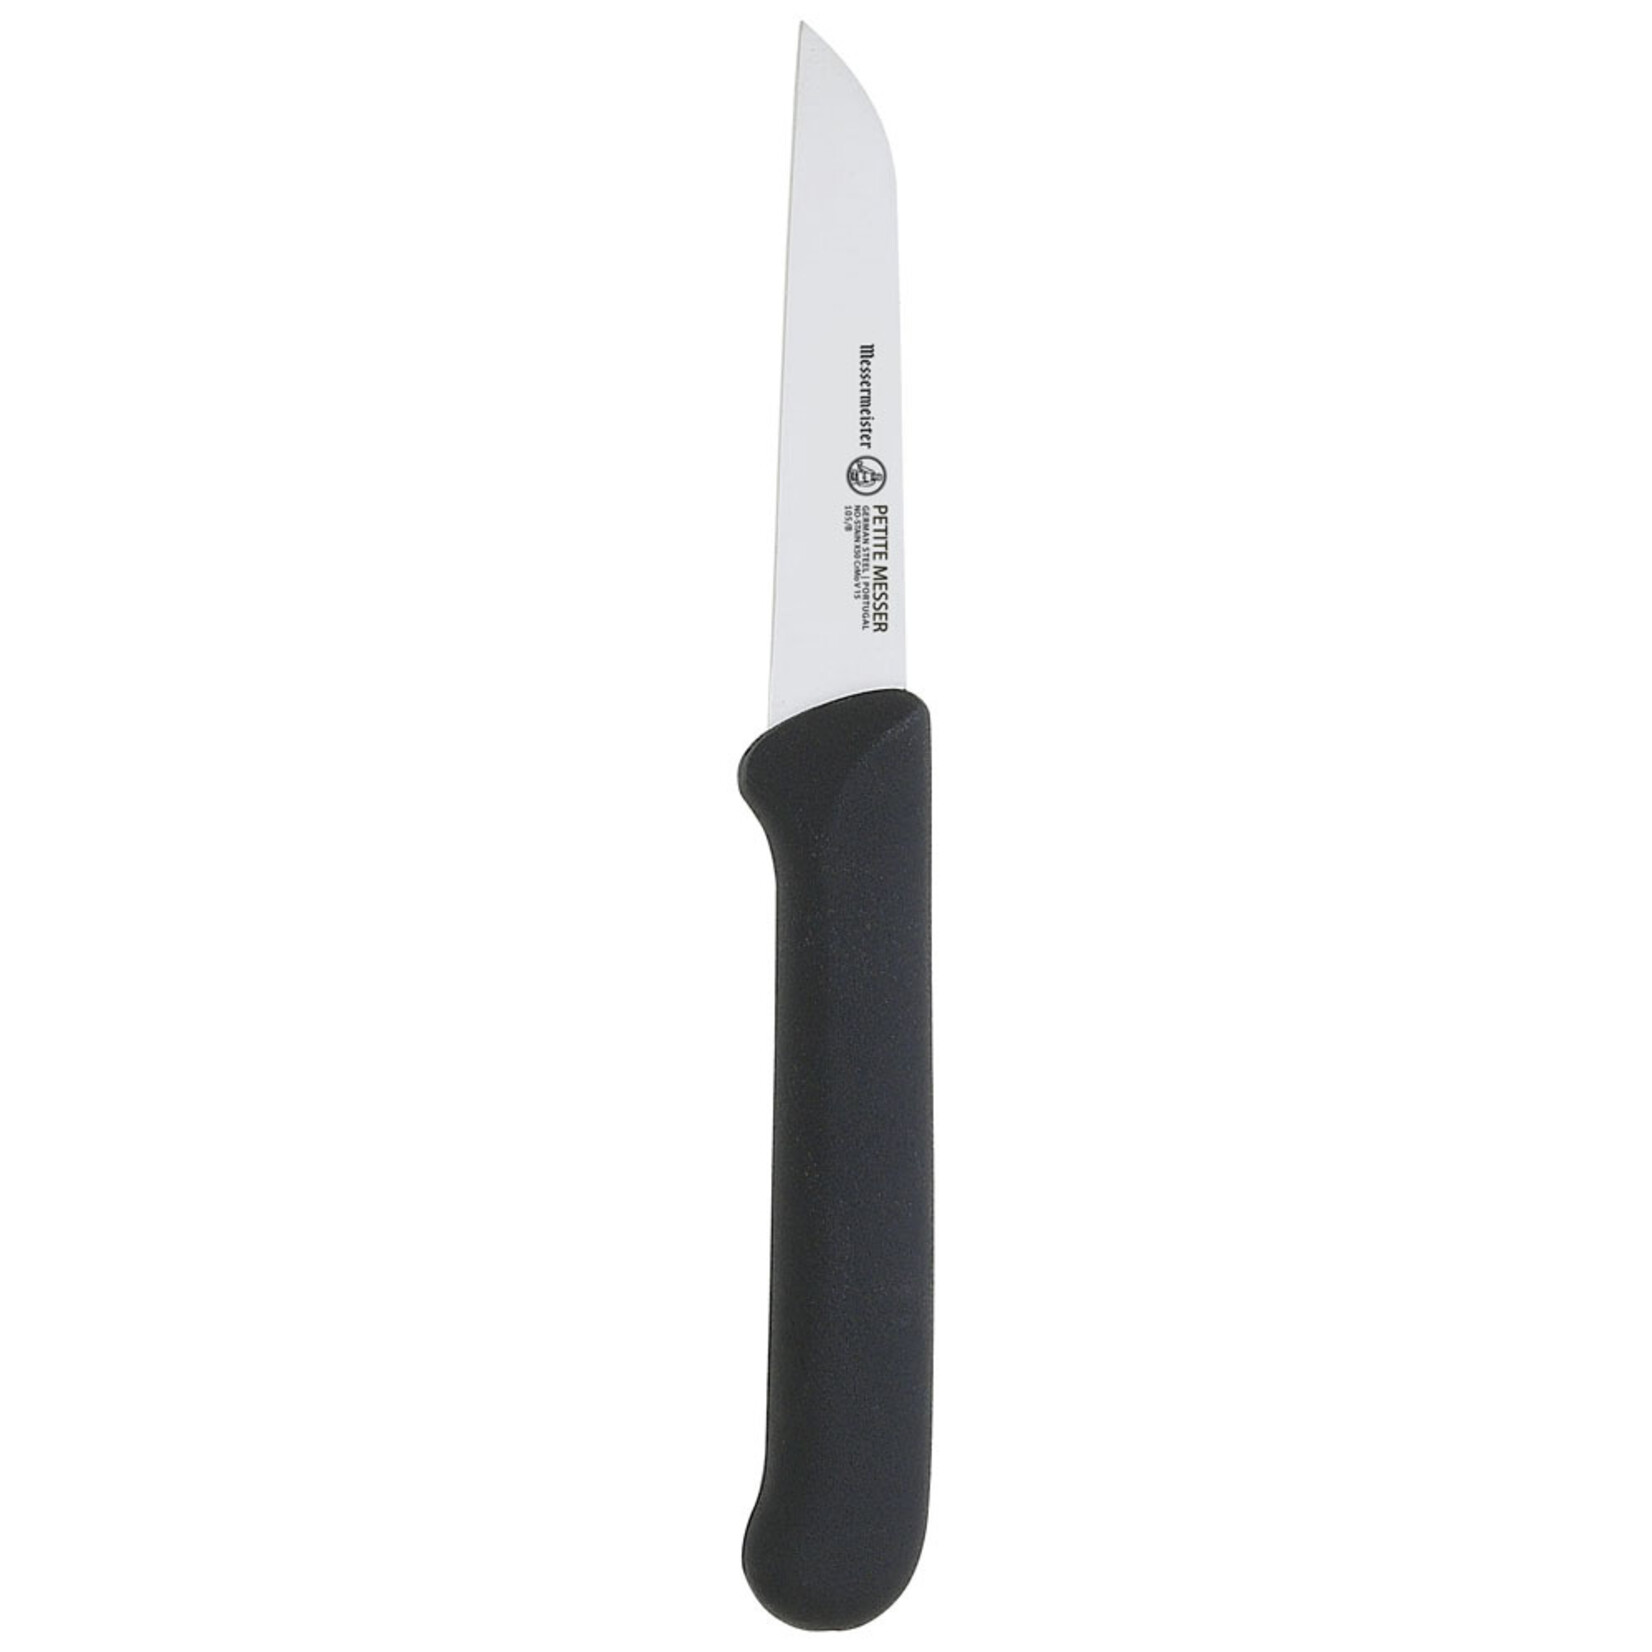 Messermeister 3 Inch Sheep's Foot Parer with Matching Sheath in Black